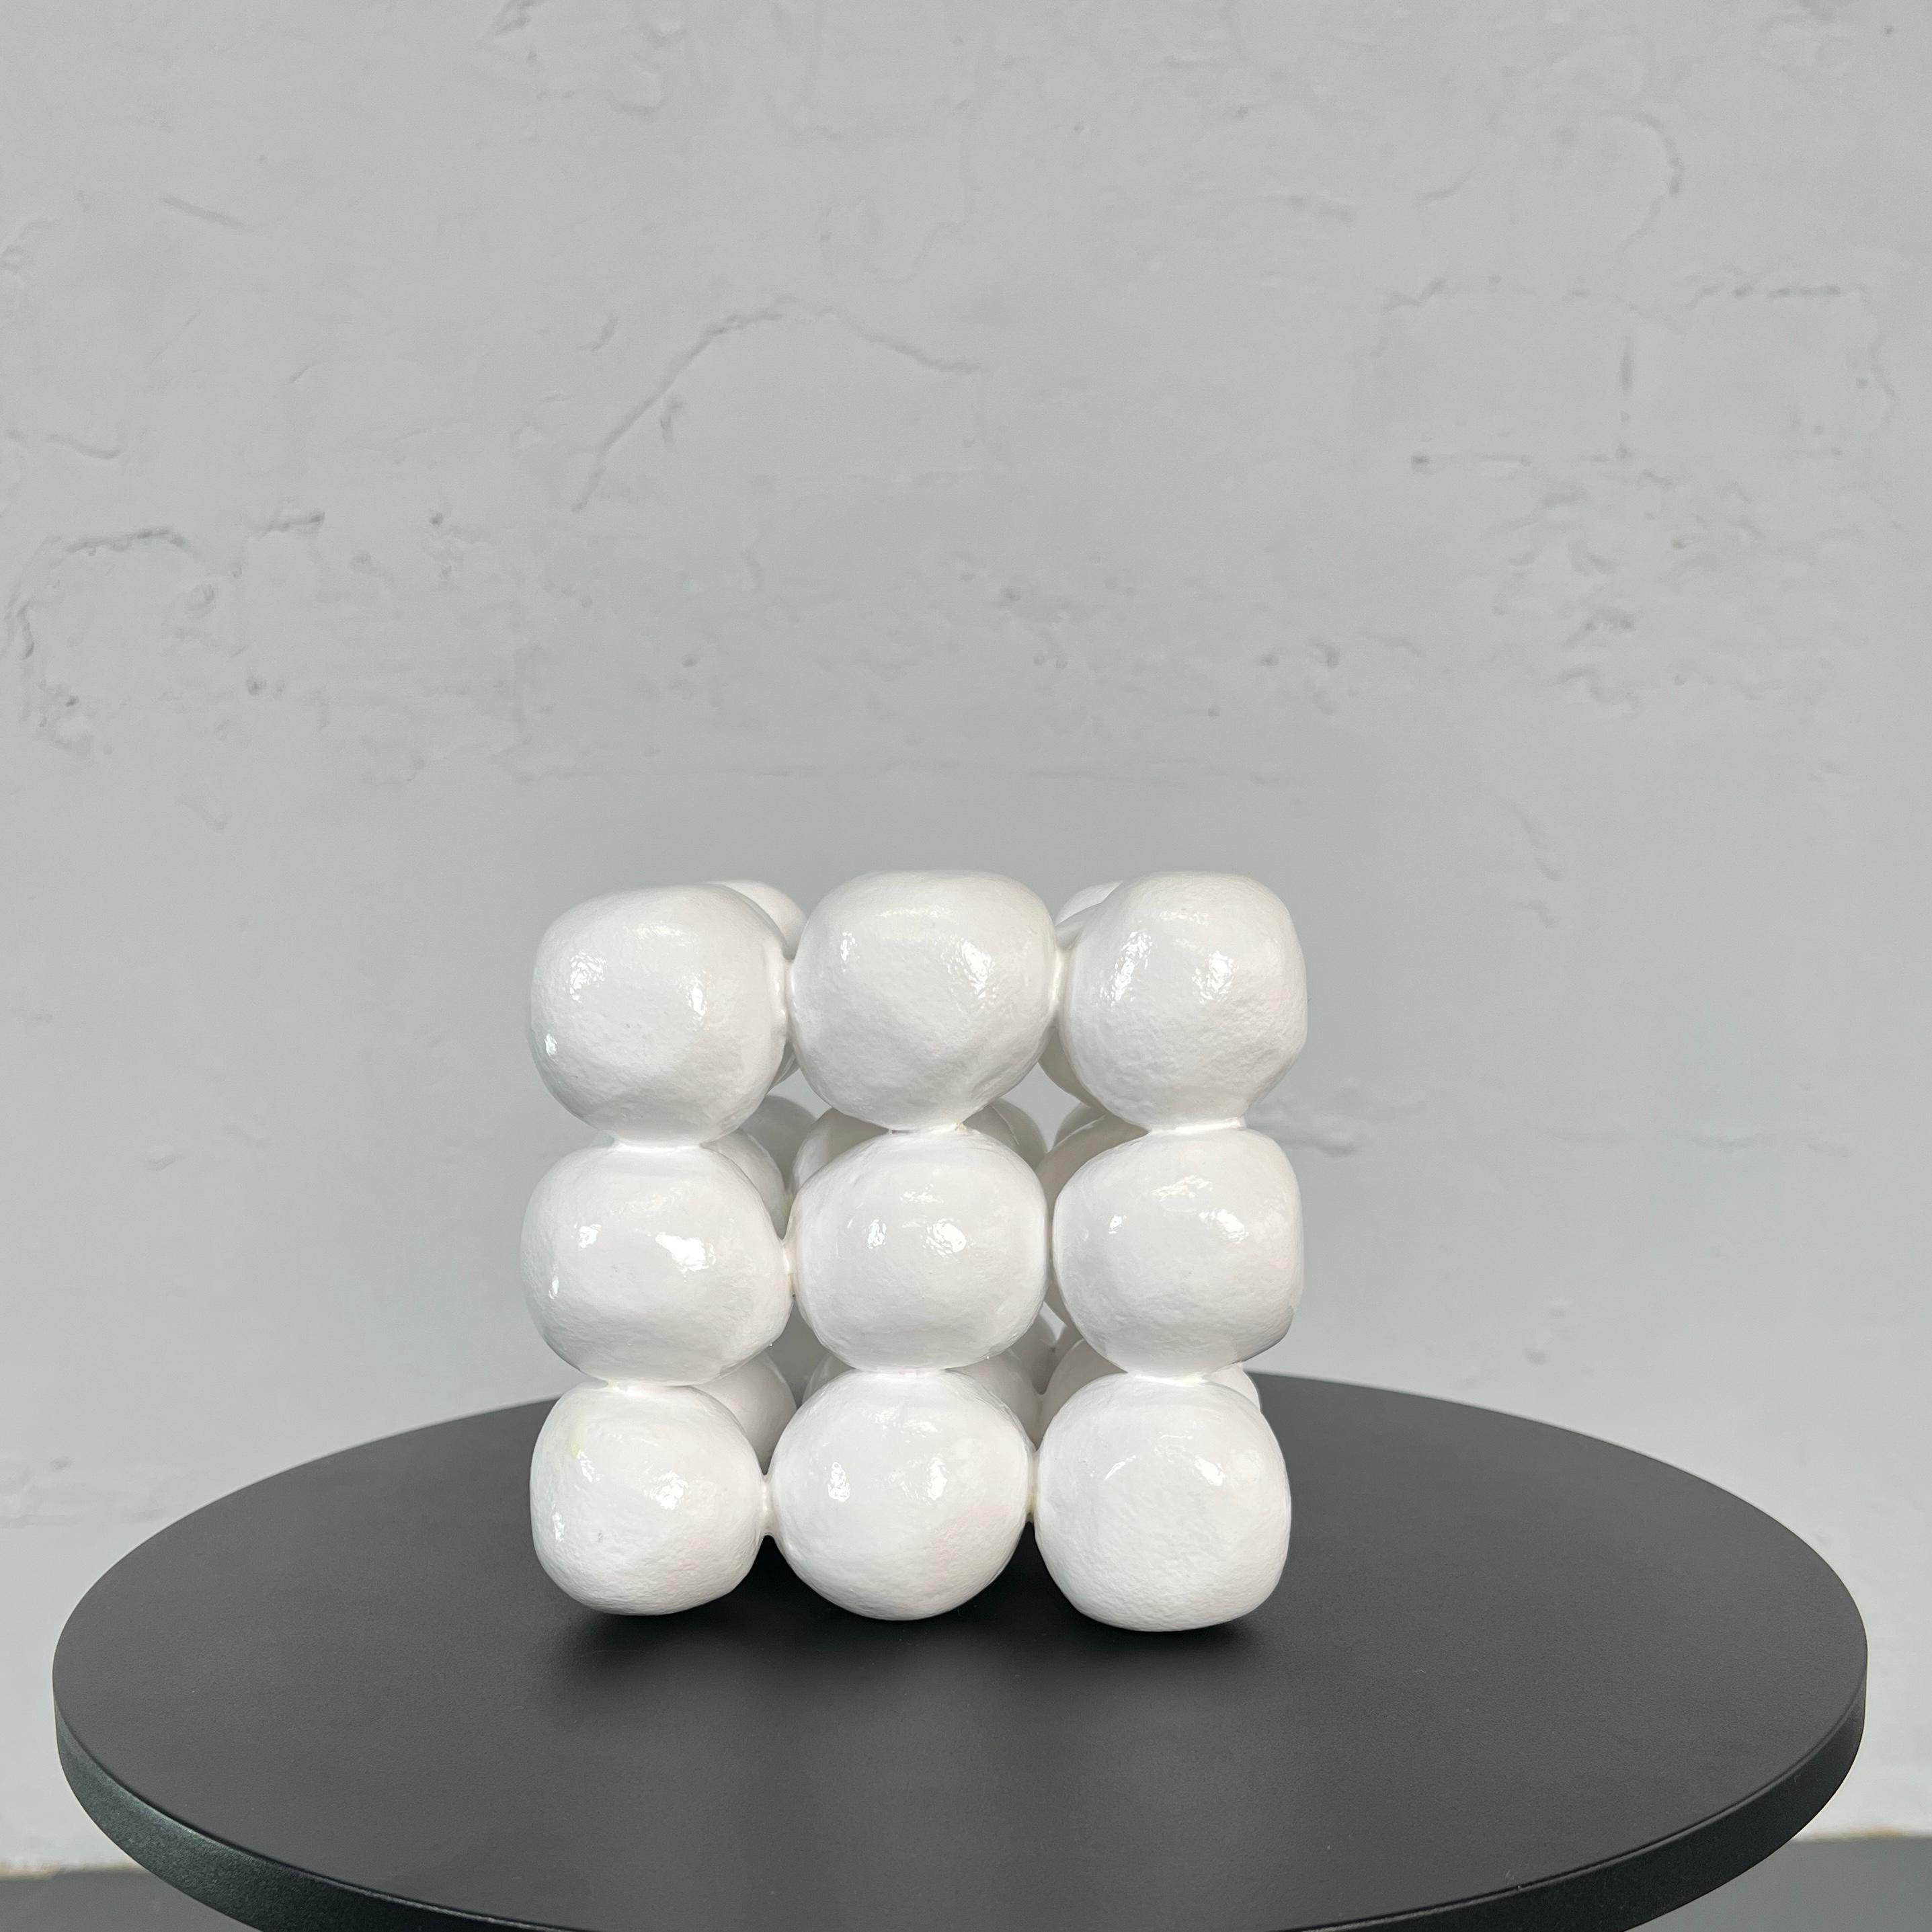 Made in Spain, 2023.

Pure symbolism makes this series of sculptures ideal for table or floor-pedestal installation in the office, bedroom, cabinet, reception, or hall.

Location and Delivery from Spain

Materials: clay, acrylic, varnish

Size:

6.5